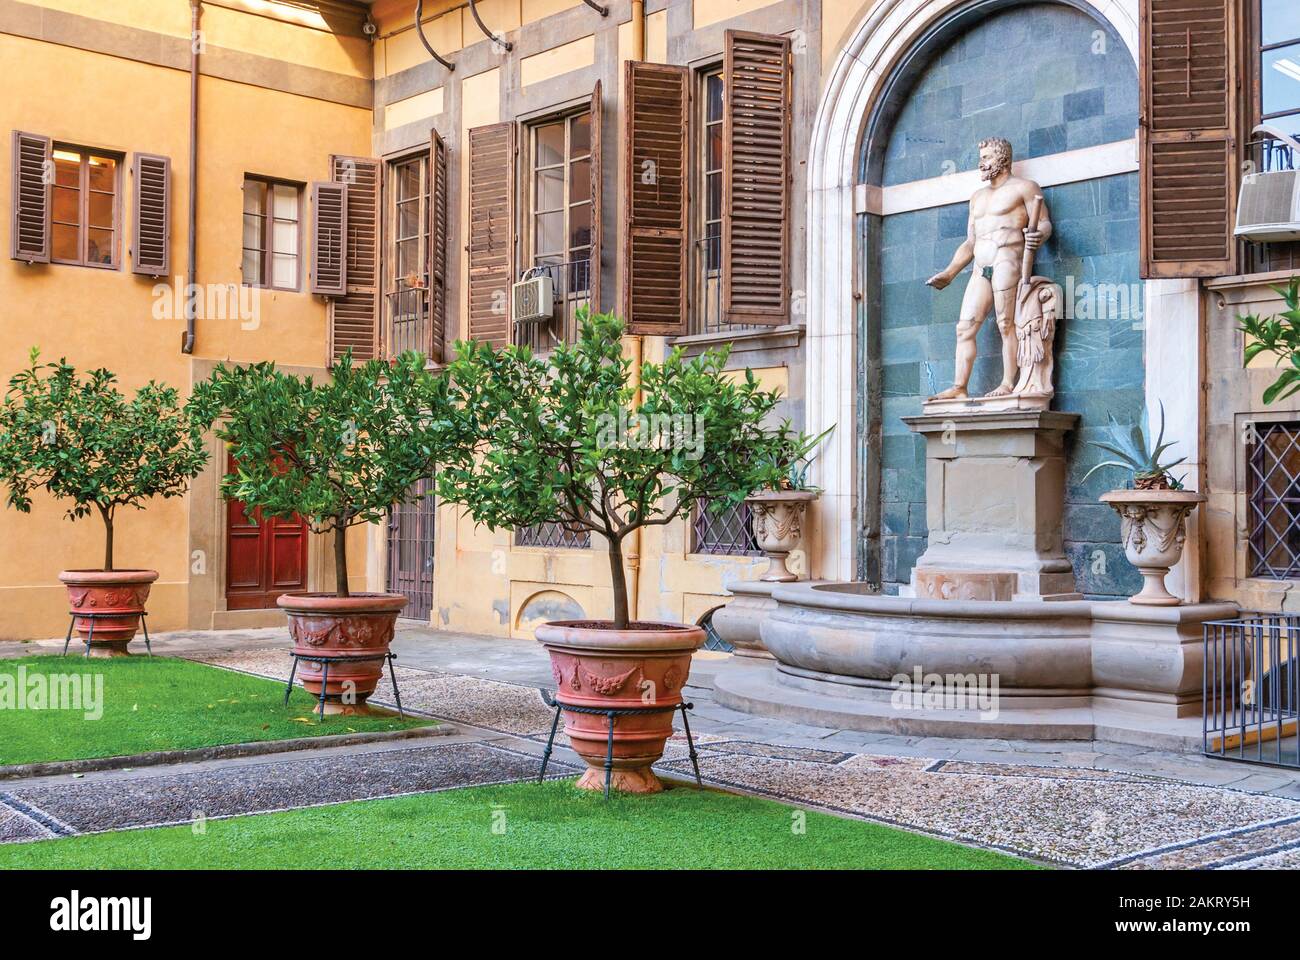 Outer courtyard of the Medici Riccardi Palace, which has an Italian garden with statues and tubs with plants. Florence, Italy Stock Photo